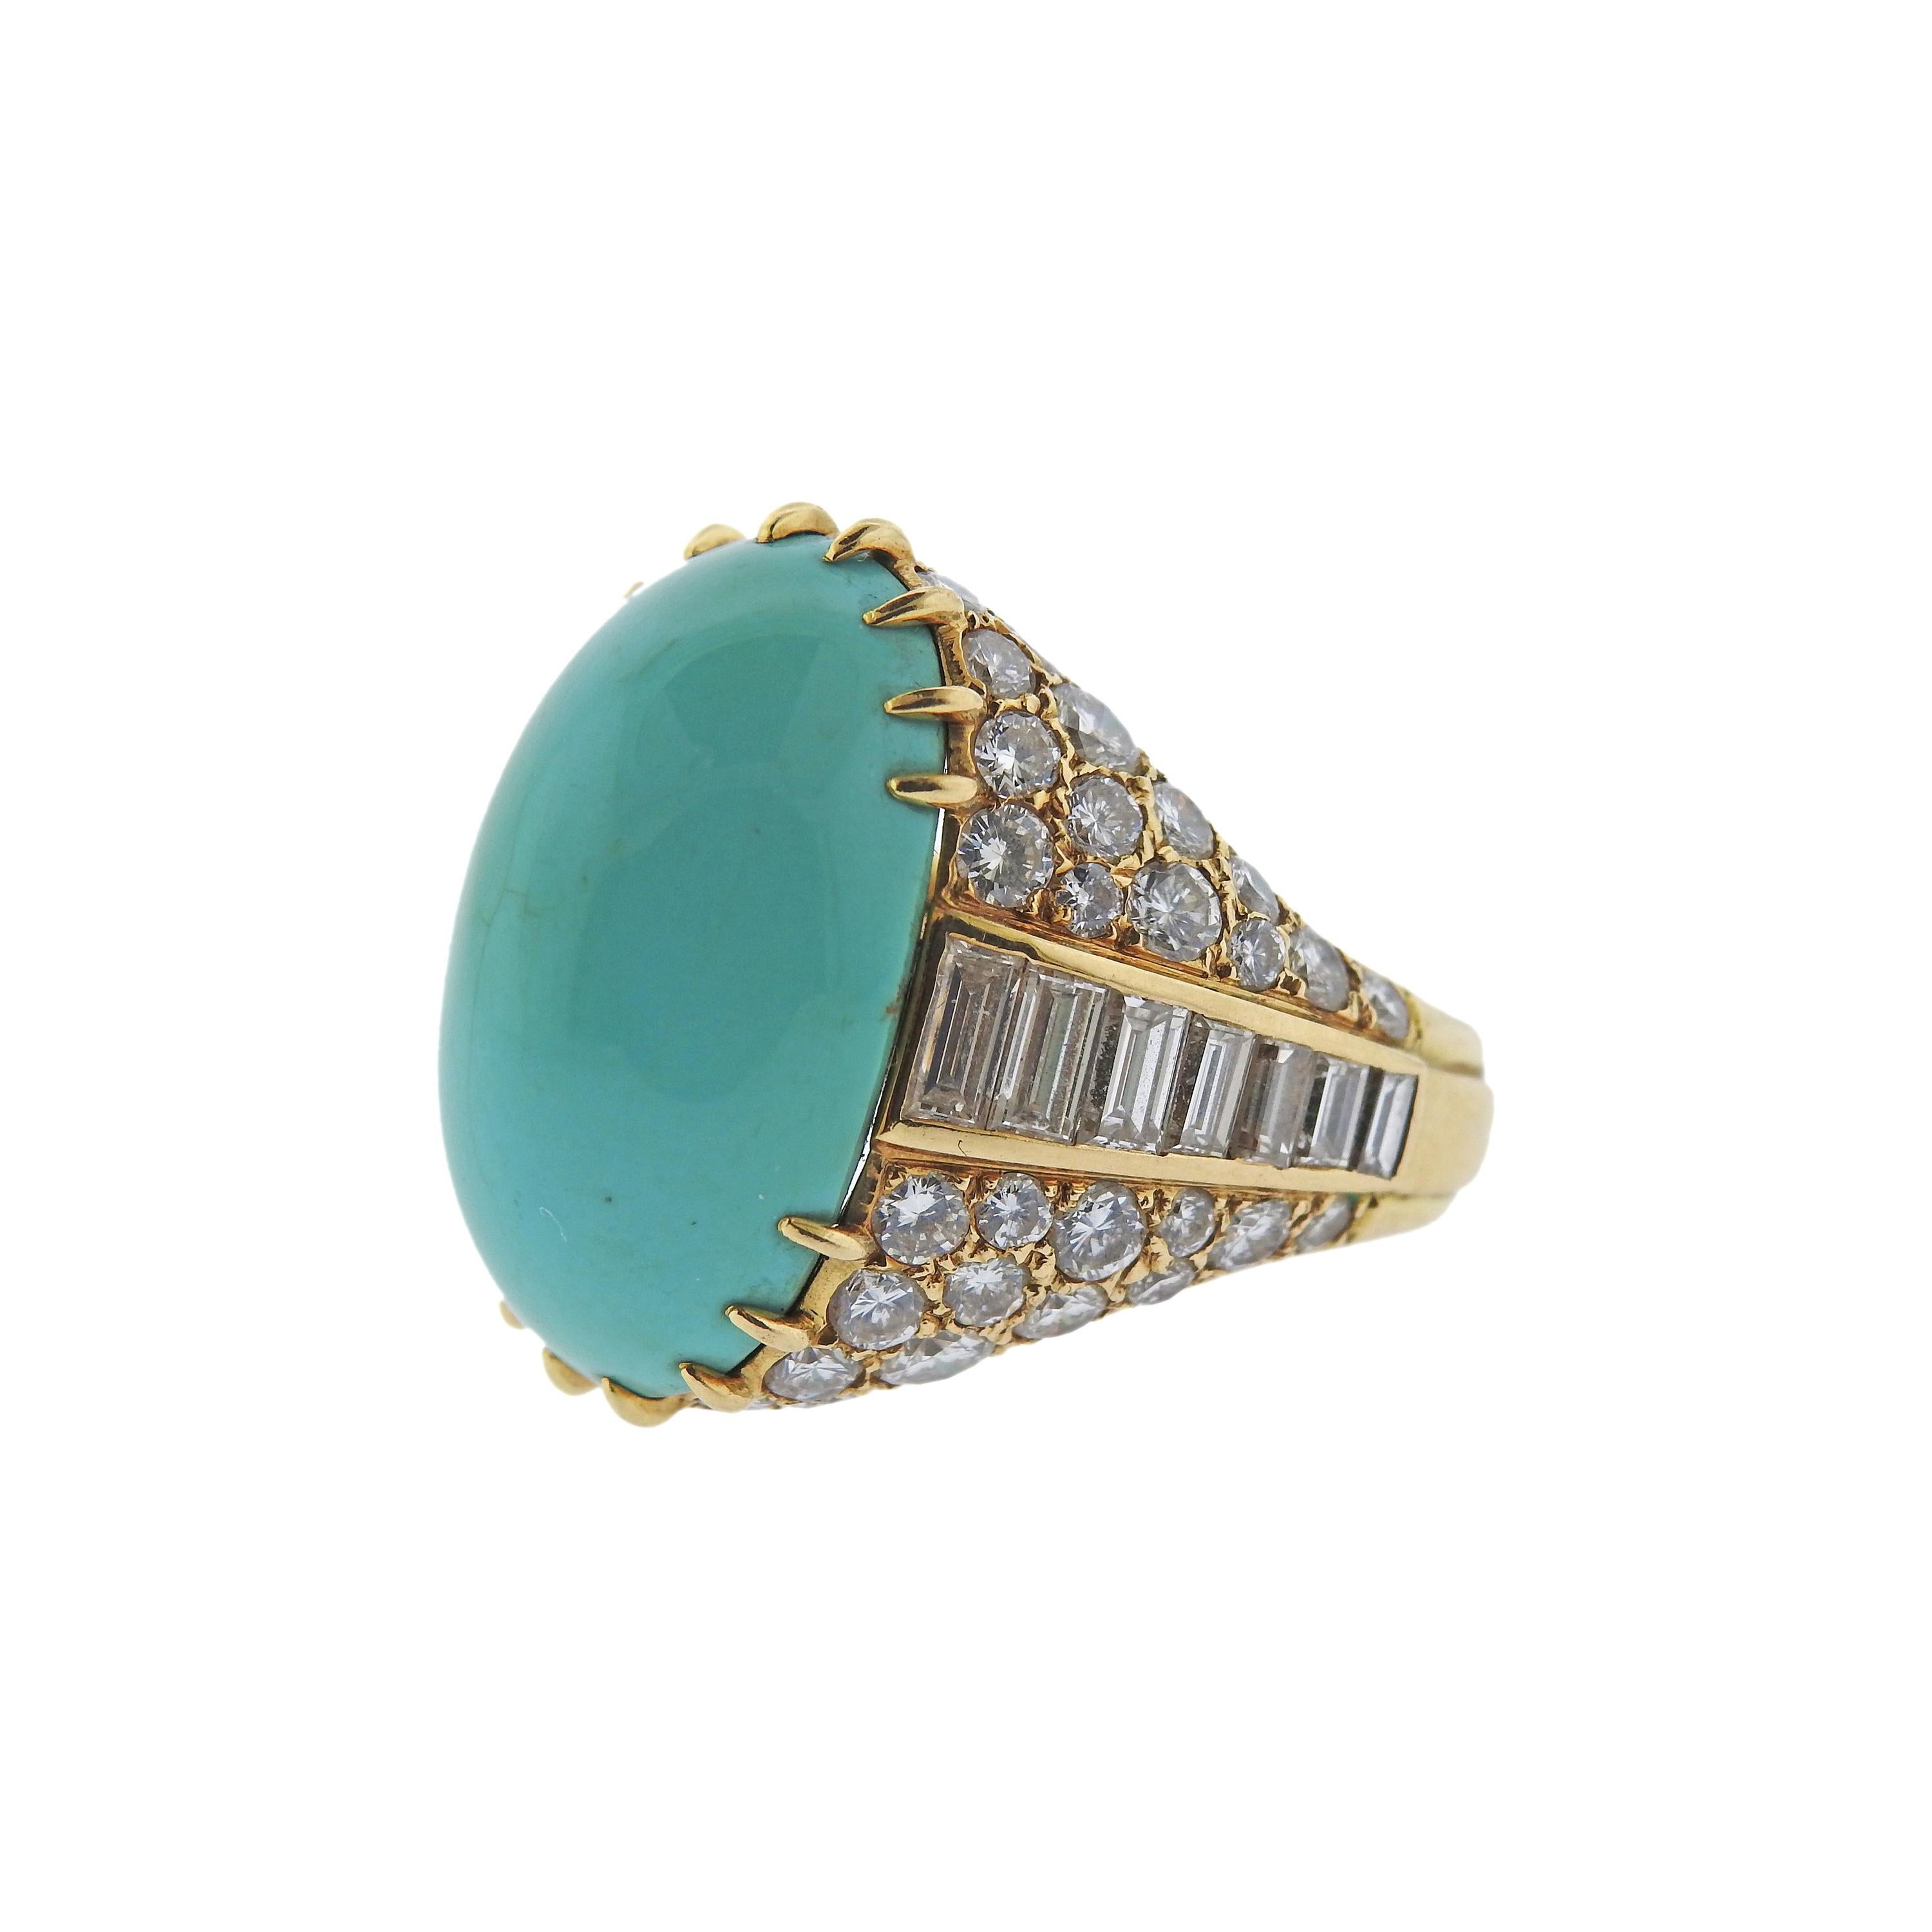 Magnificent Monture Cartier Turquoise Diamond Gold Ring